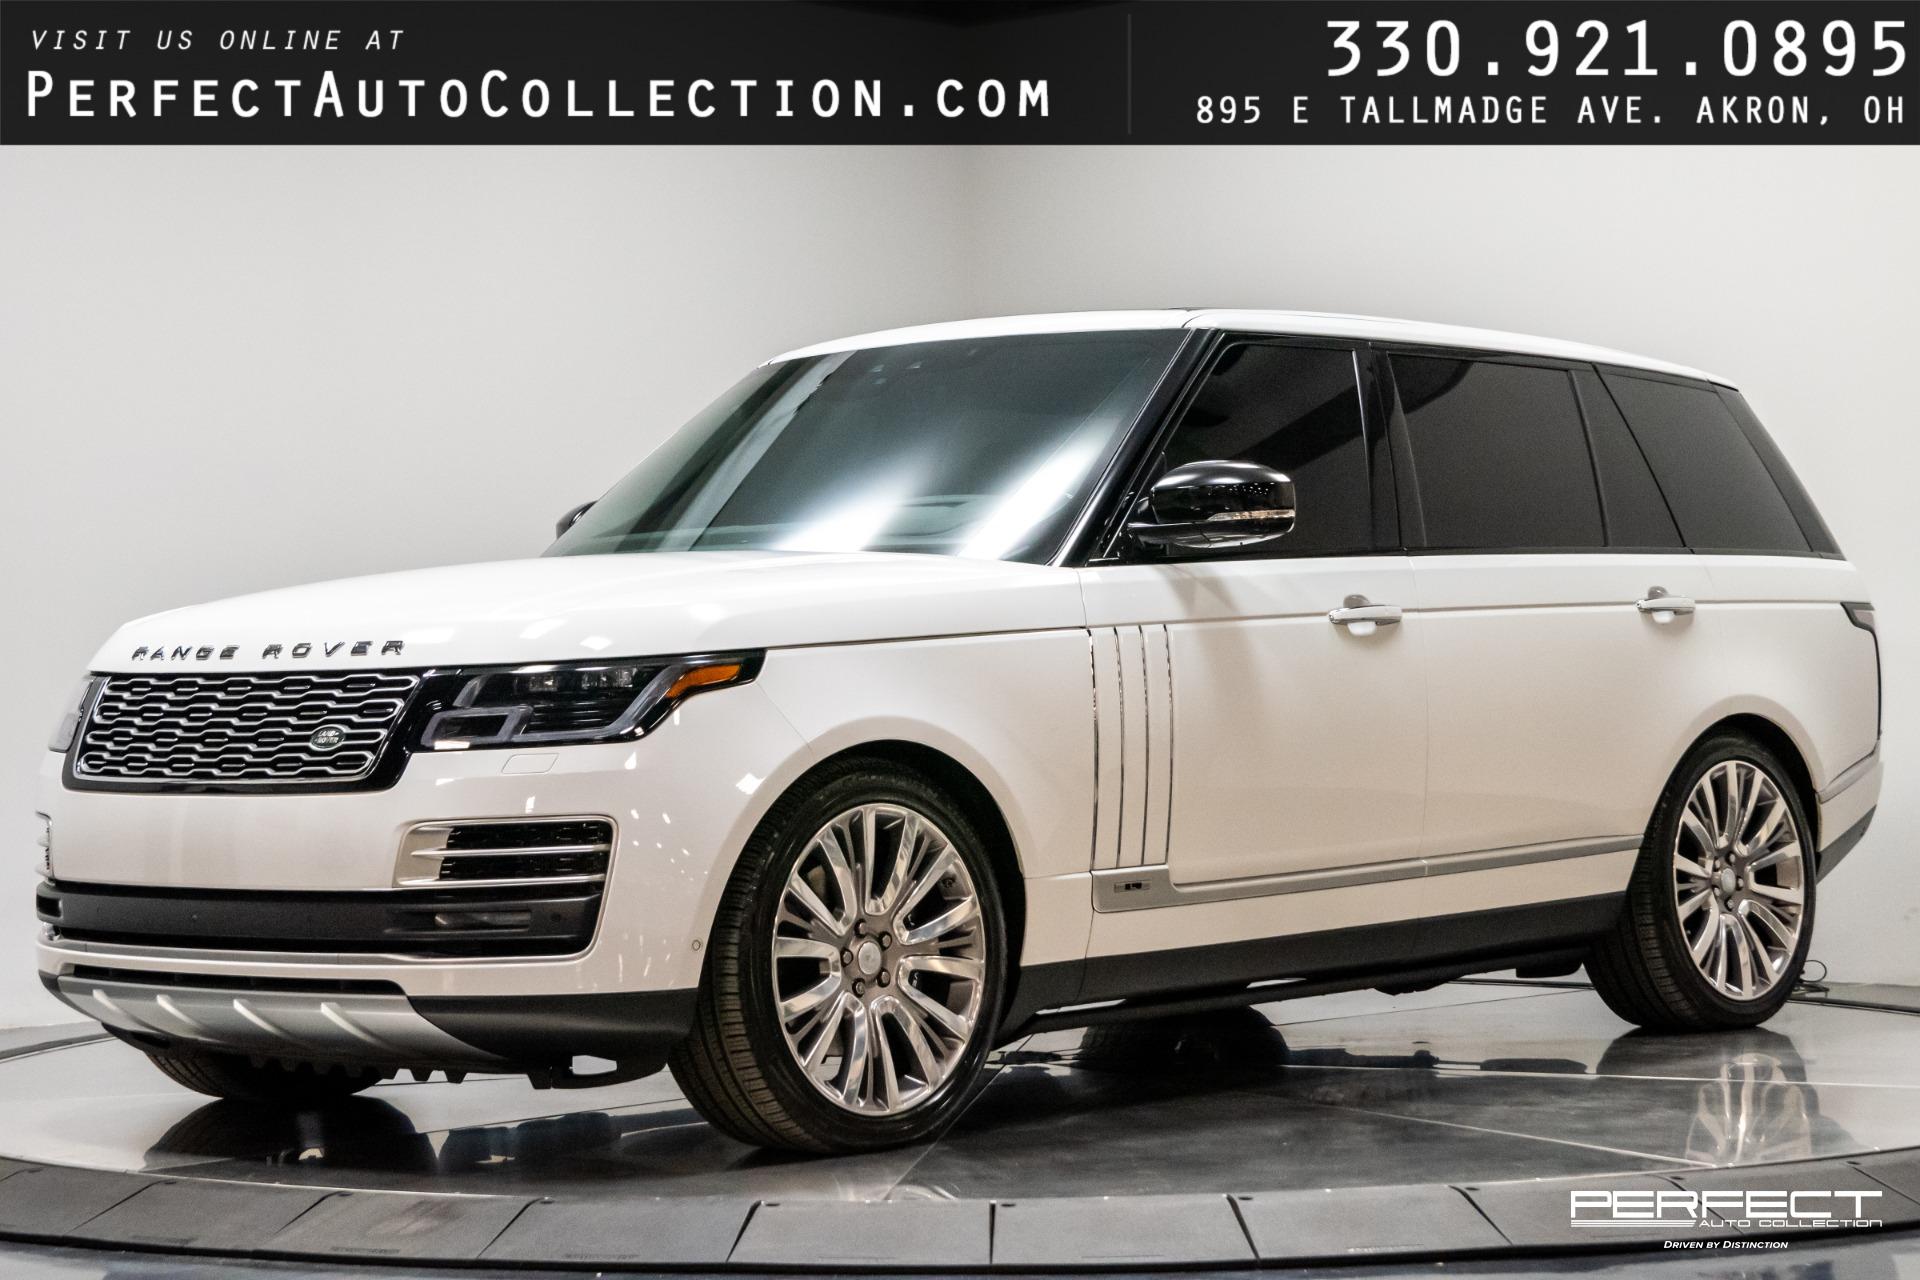 Used 2019 Land Rover Range Rover SVAutobiography LWB For Sale (Sold)  Perfect Auto Collection Stock #KA550195